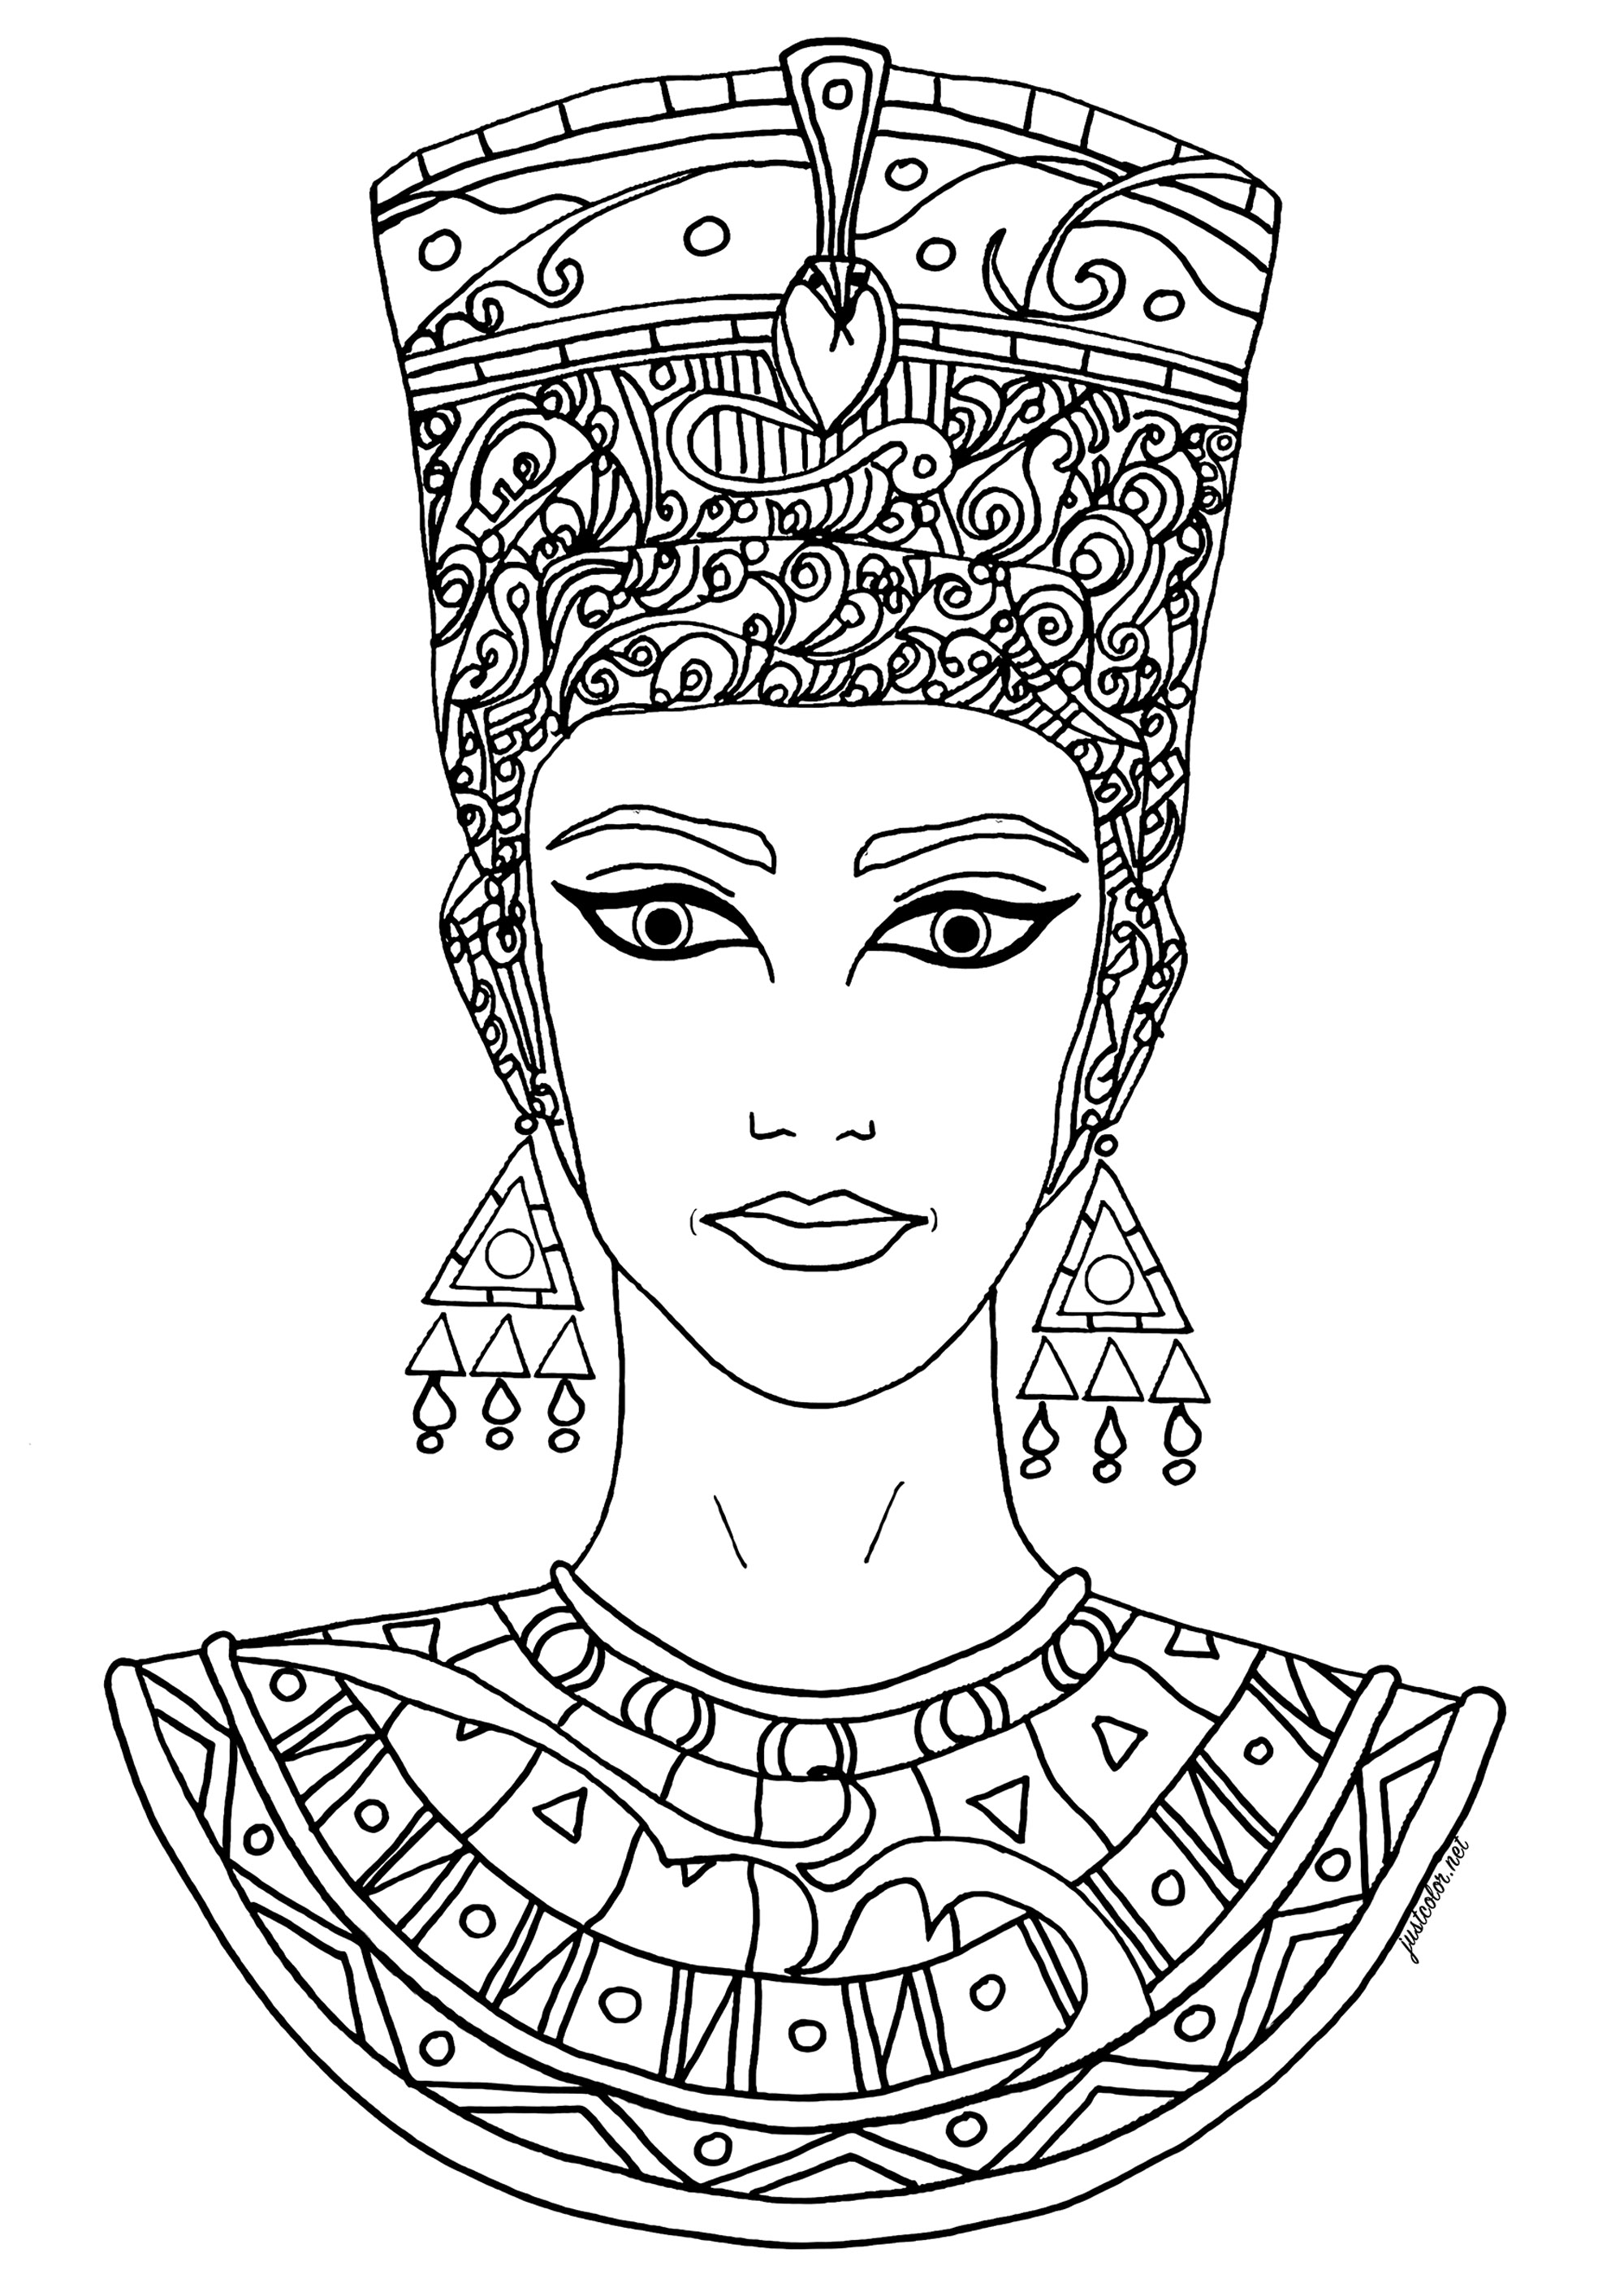 Lovely drawing freely inspired by Nefertiti. Nefertiti was an ancient Egyptian queen, wife of the pharaoh Akhenaten who reigned around 1353-1336 B.C. She is best known for her role in Akhenaten's religious revolution, which saw the cult of Aten, the sun god, become the dominant religion of Egypt, and for her famous bust, which is considered one of the most important works of Egyptian art.